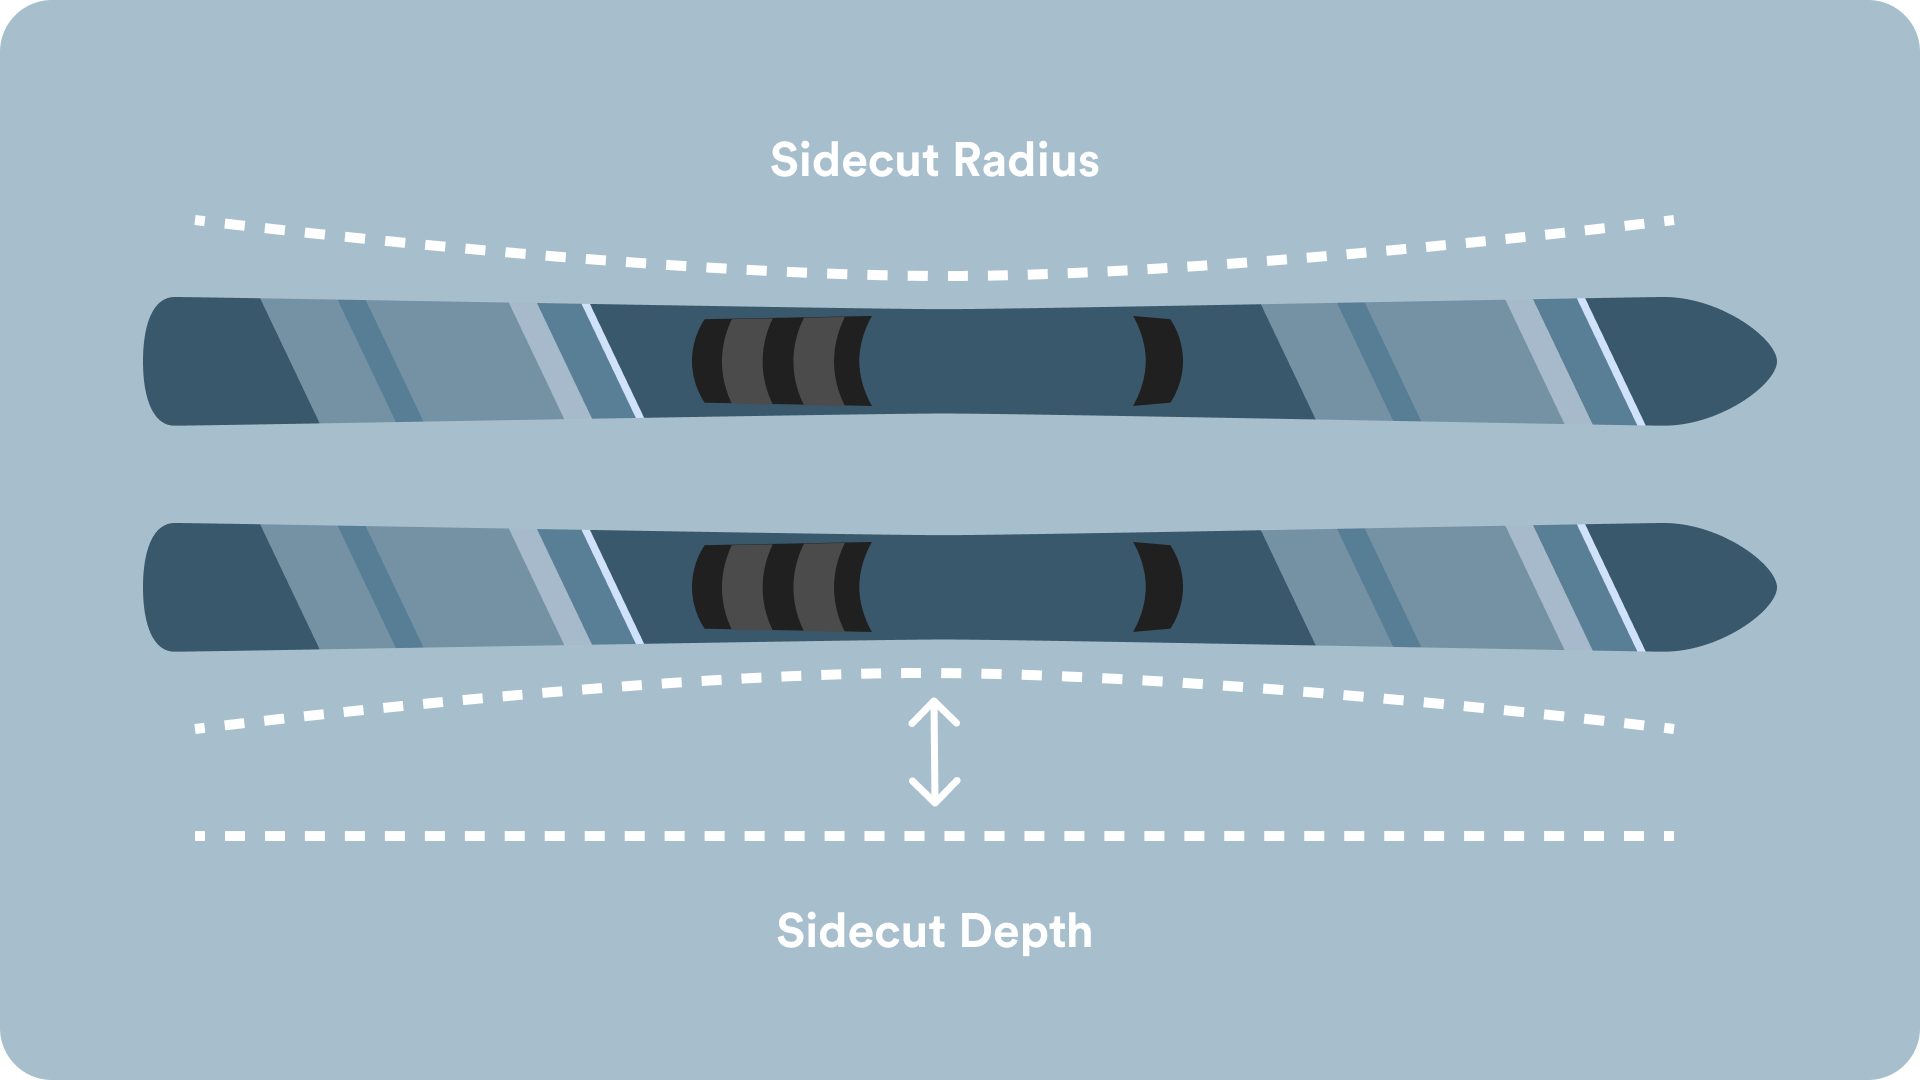 A graphic showing the sidecut radius and the sidecut depth of a ski.